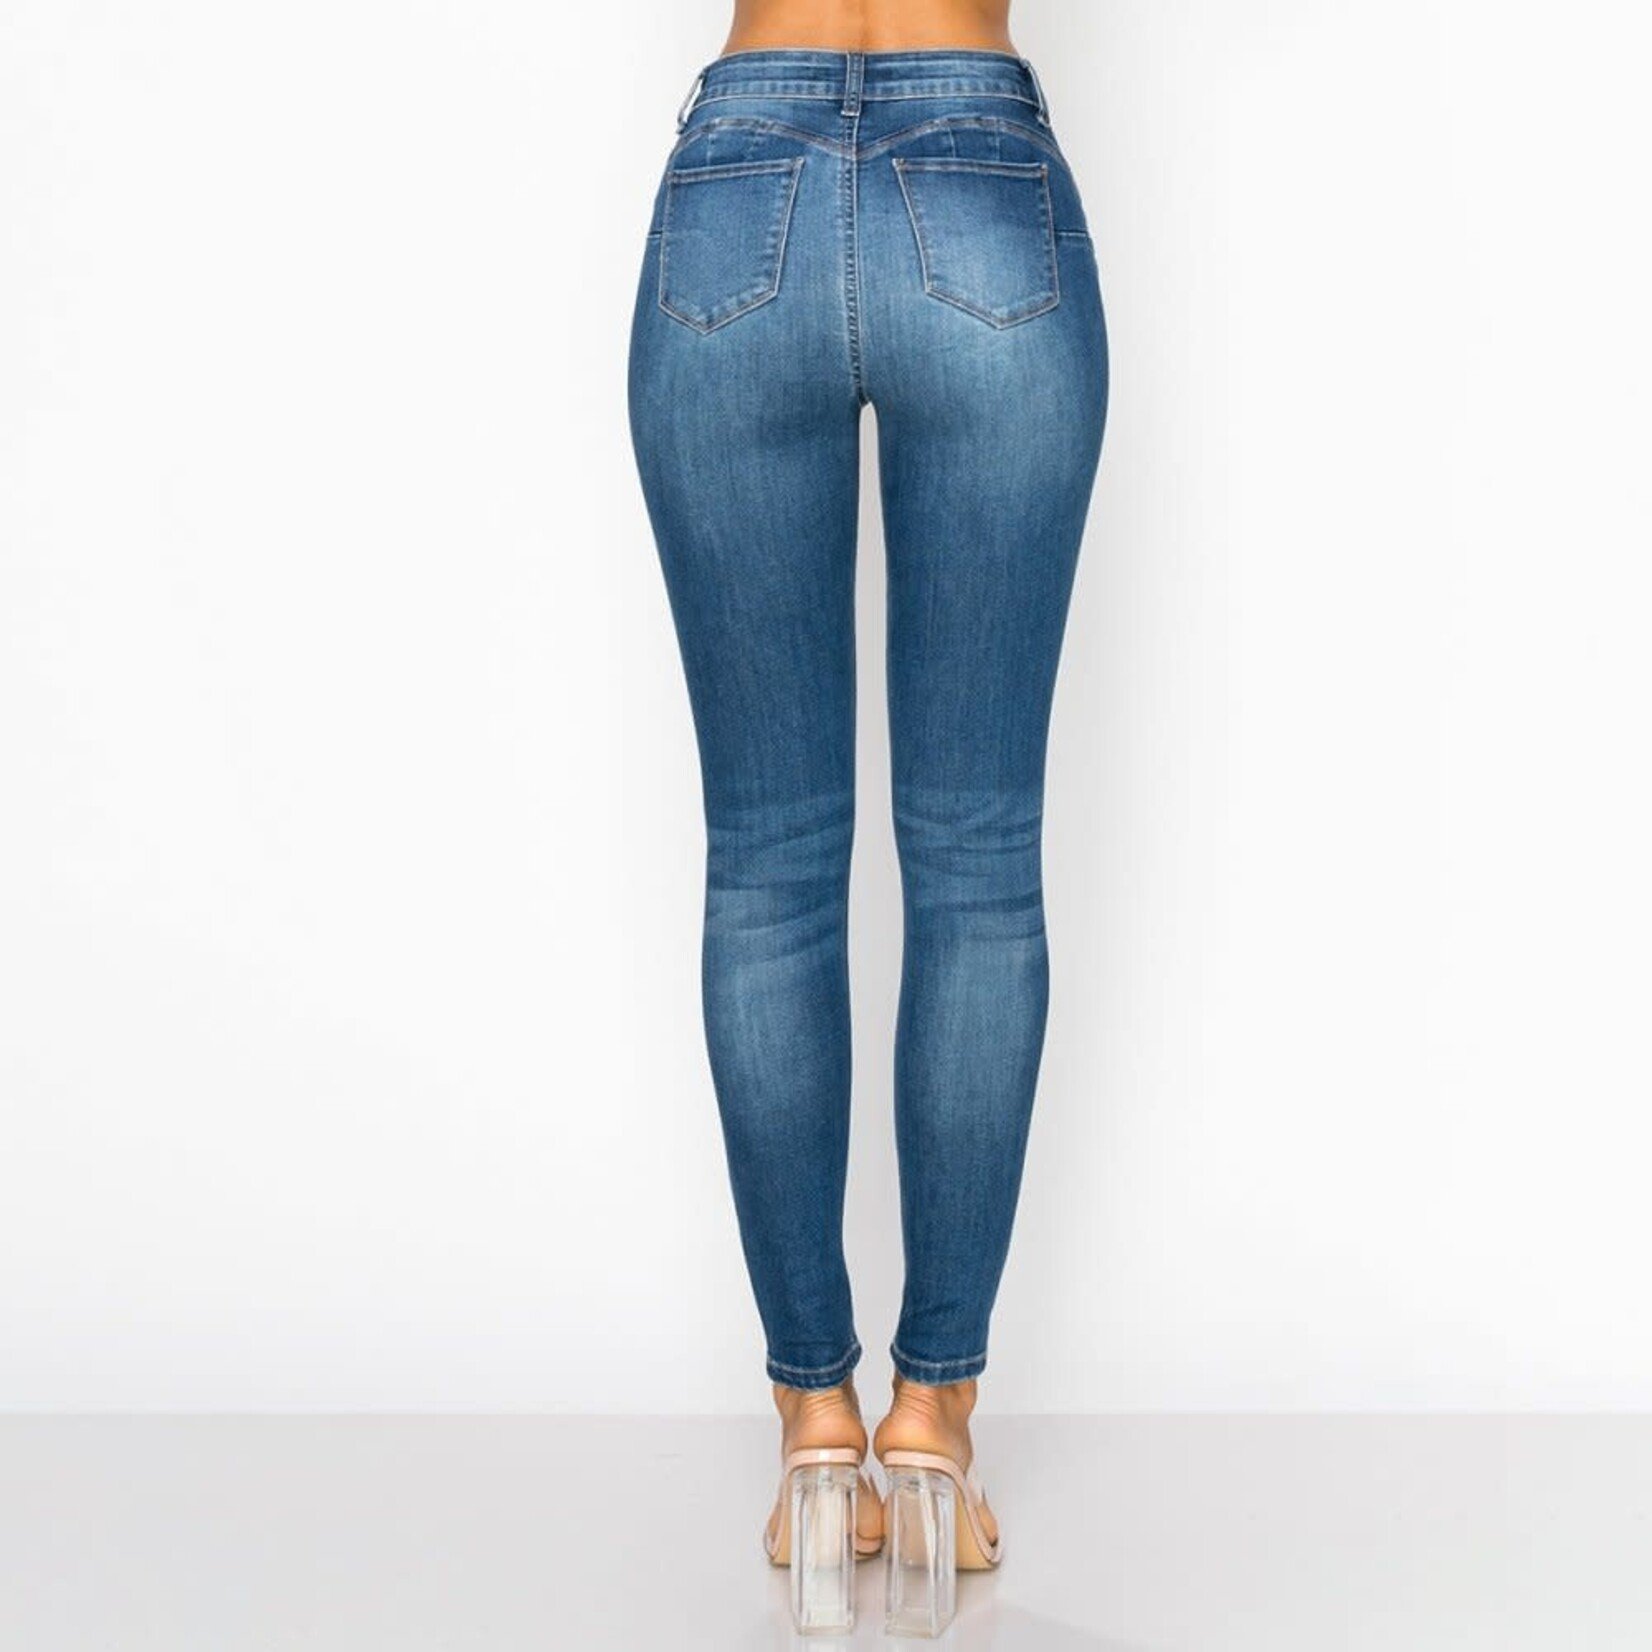 Wax Jeans Wax Jean - Repreve High-Rise Push-Up Skinny Jean - 90501